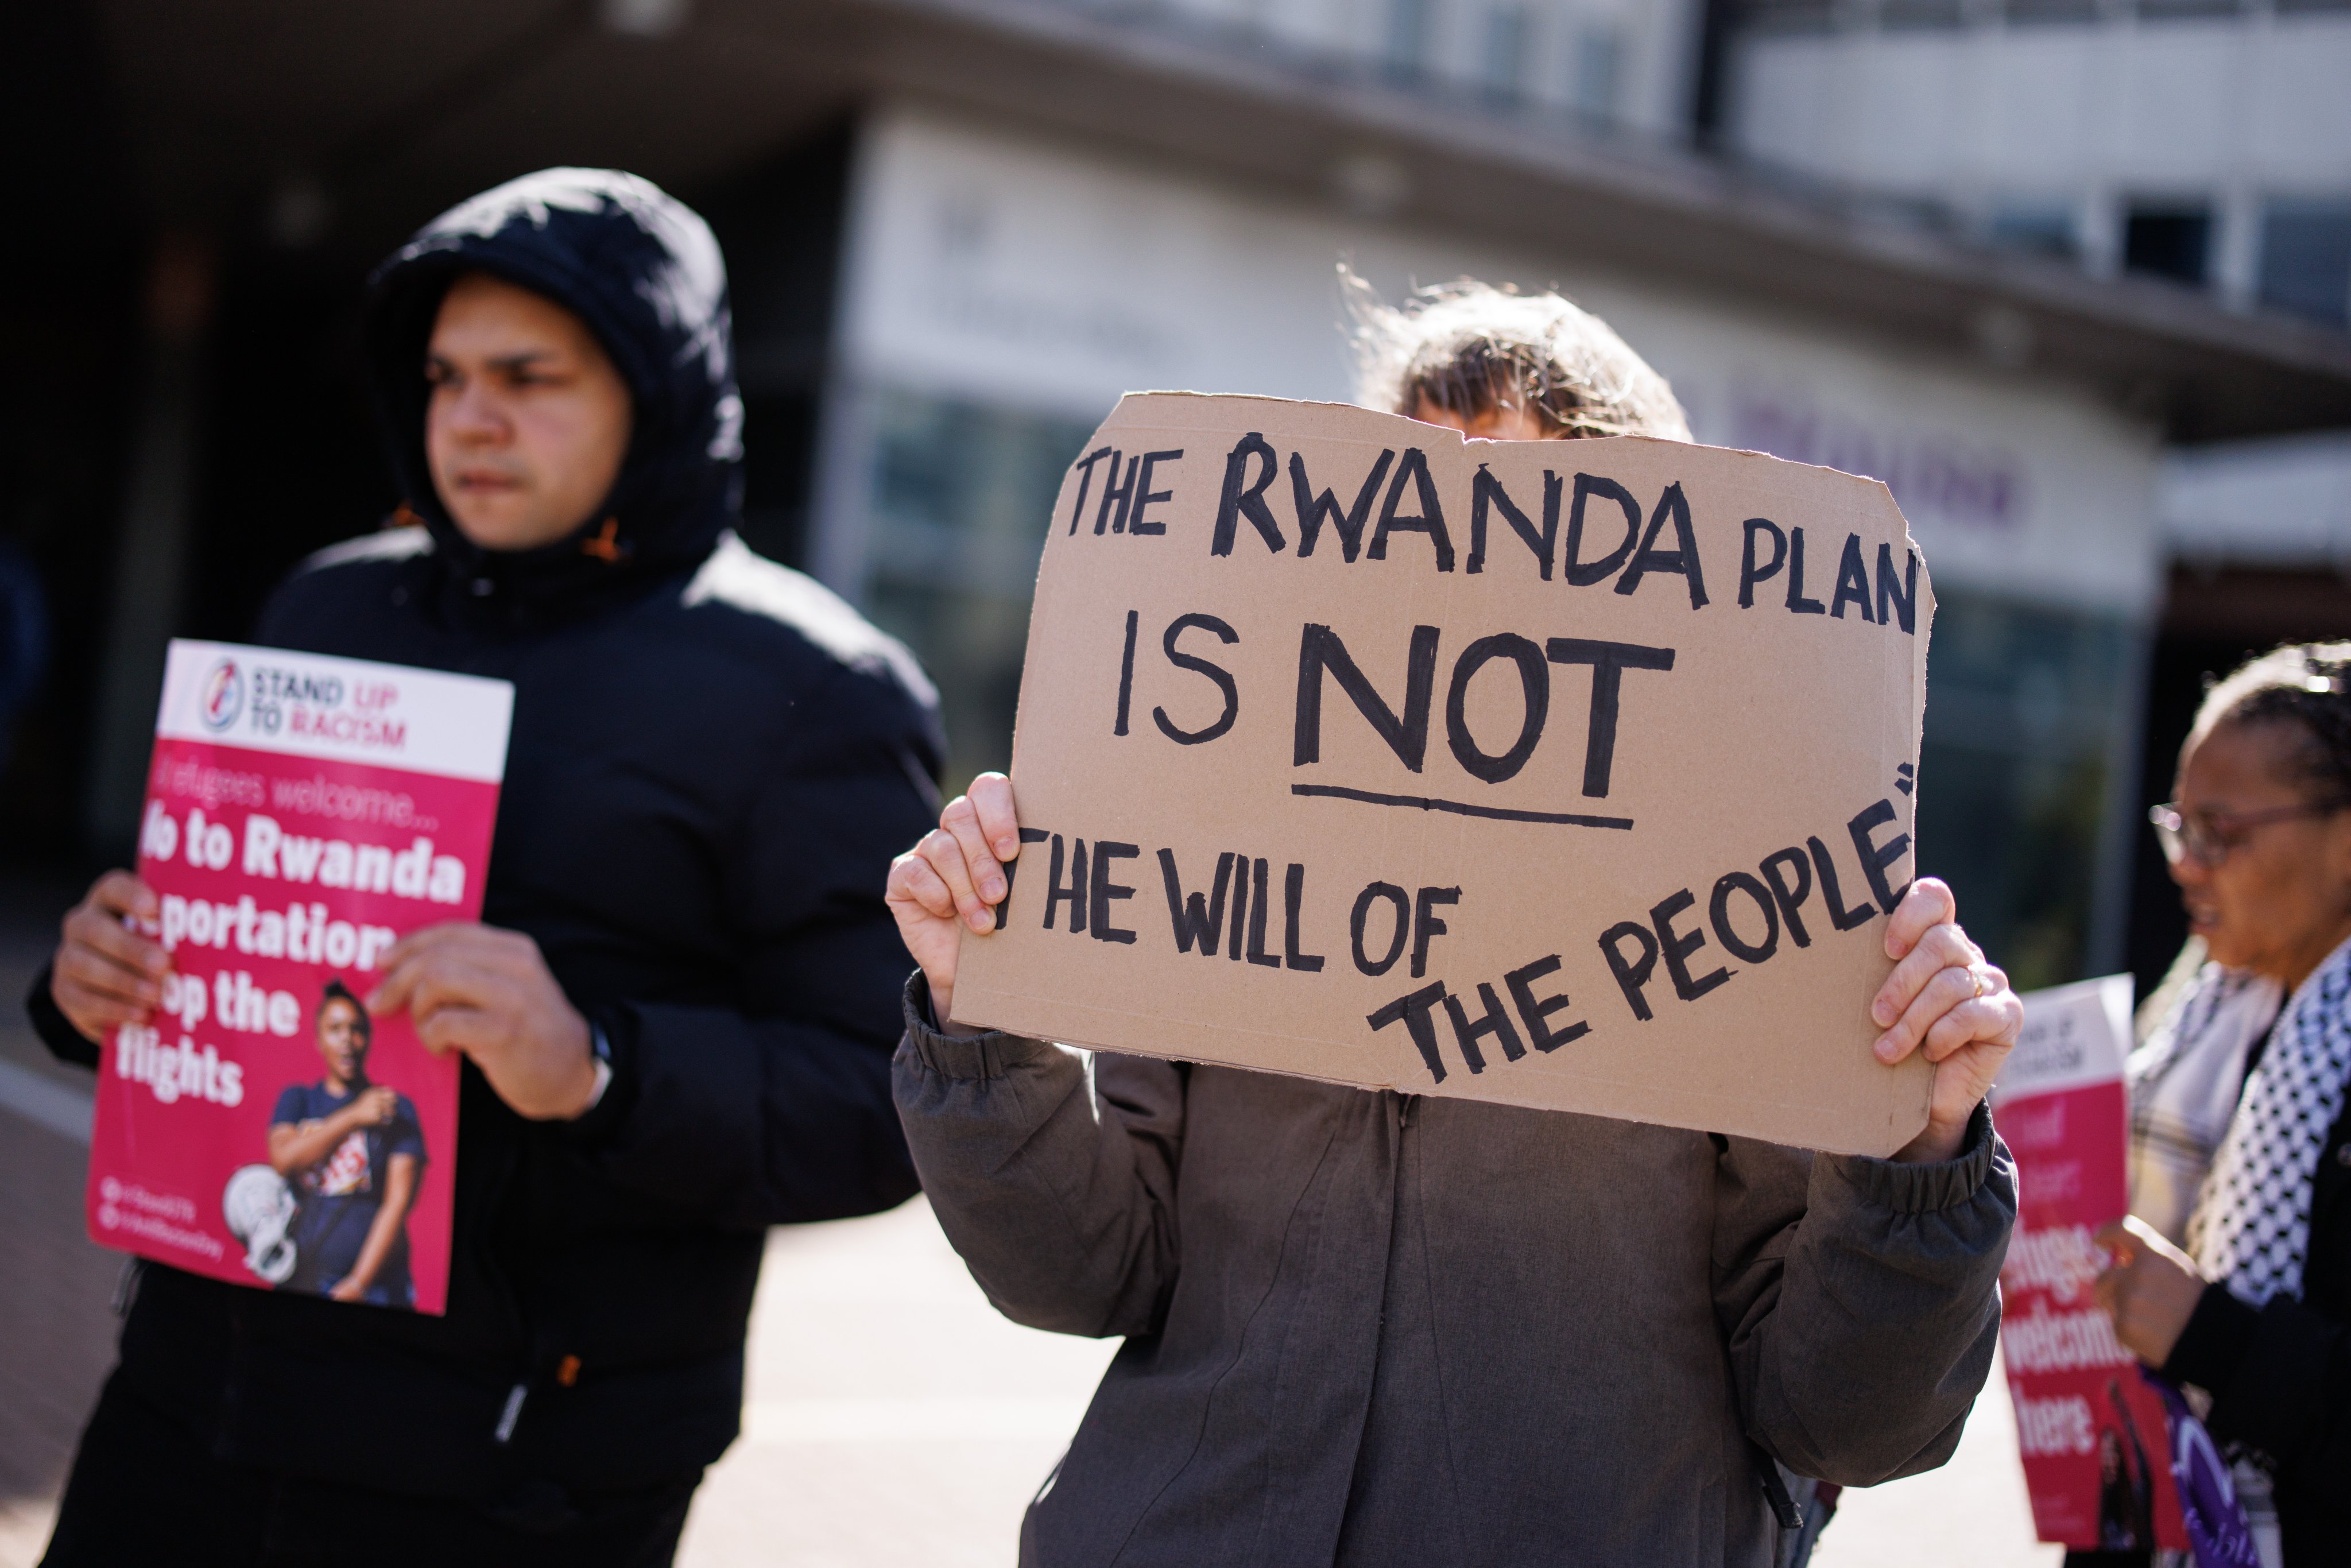 Campaigners protest the UK government’s Rwanda deportation plan. Asylum Aid launched a legal challenge against the policy, which PM Rishi Sunak aims to launch within weeks. Photo: EPA-EFE